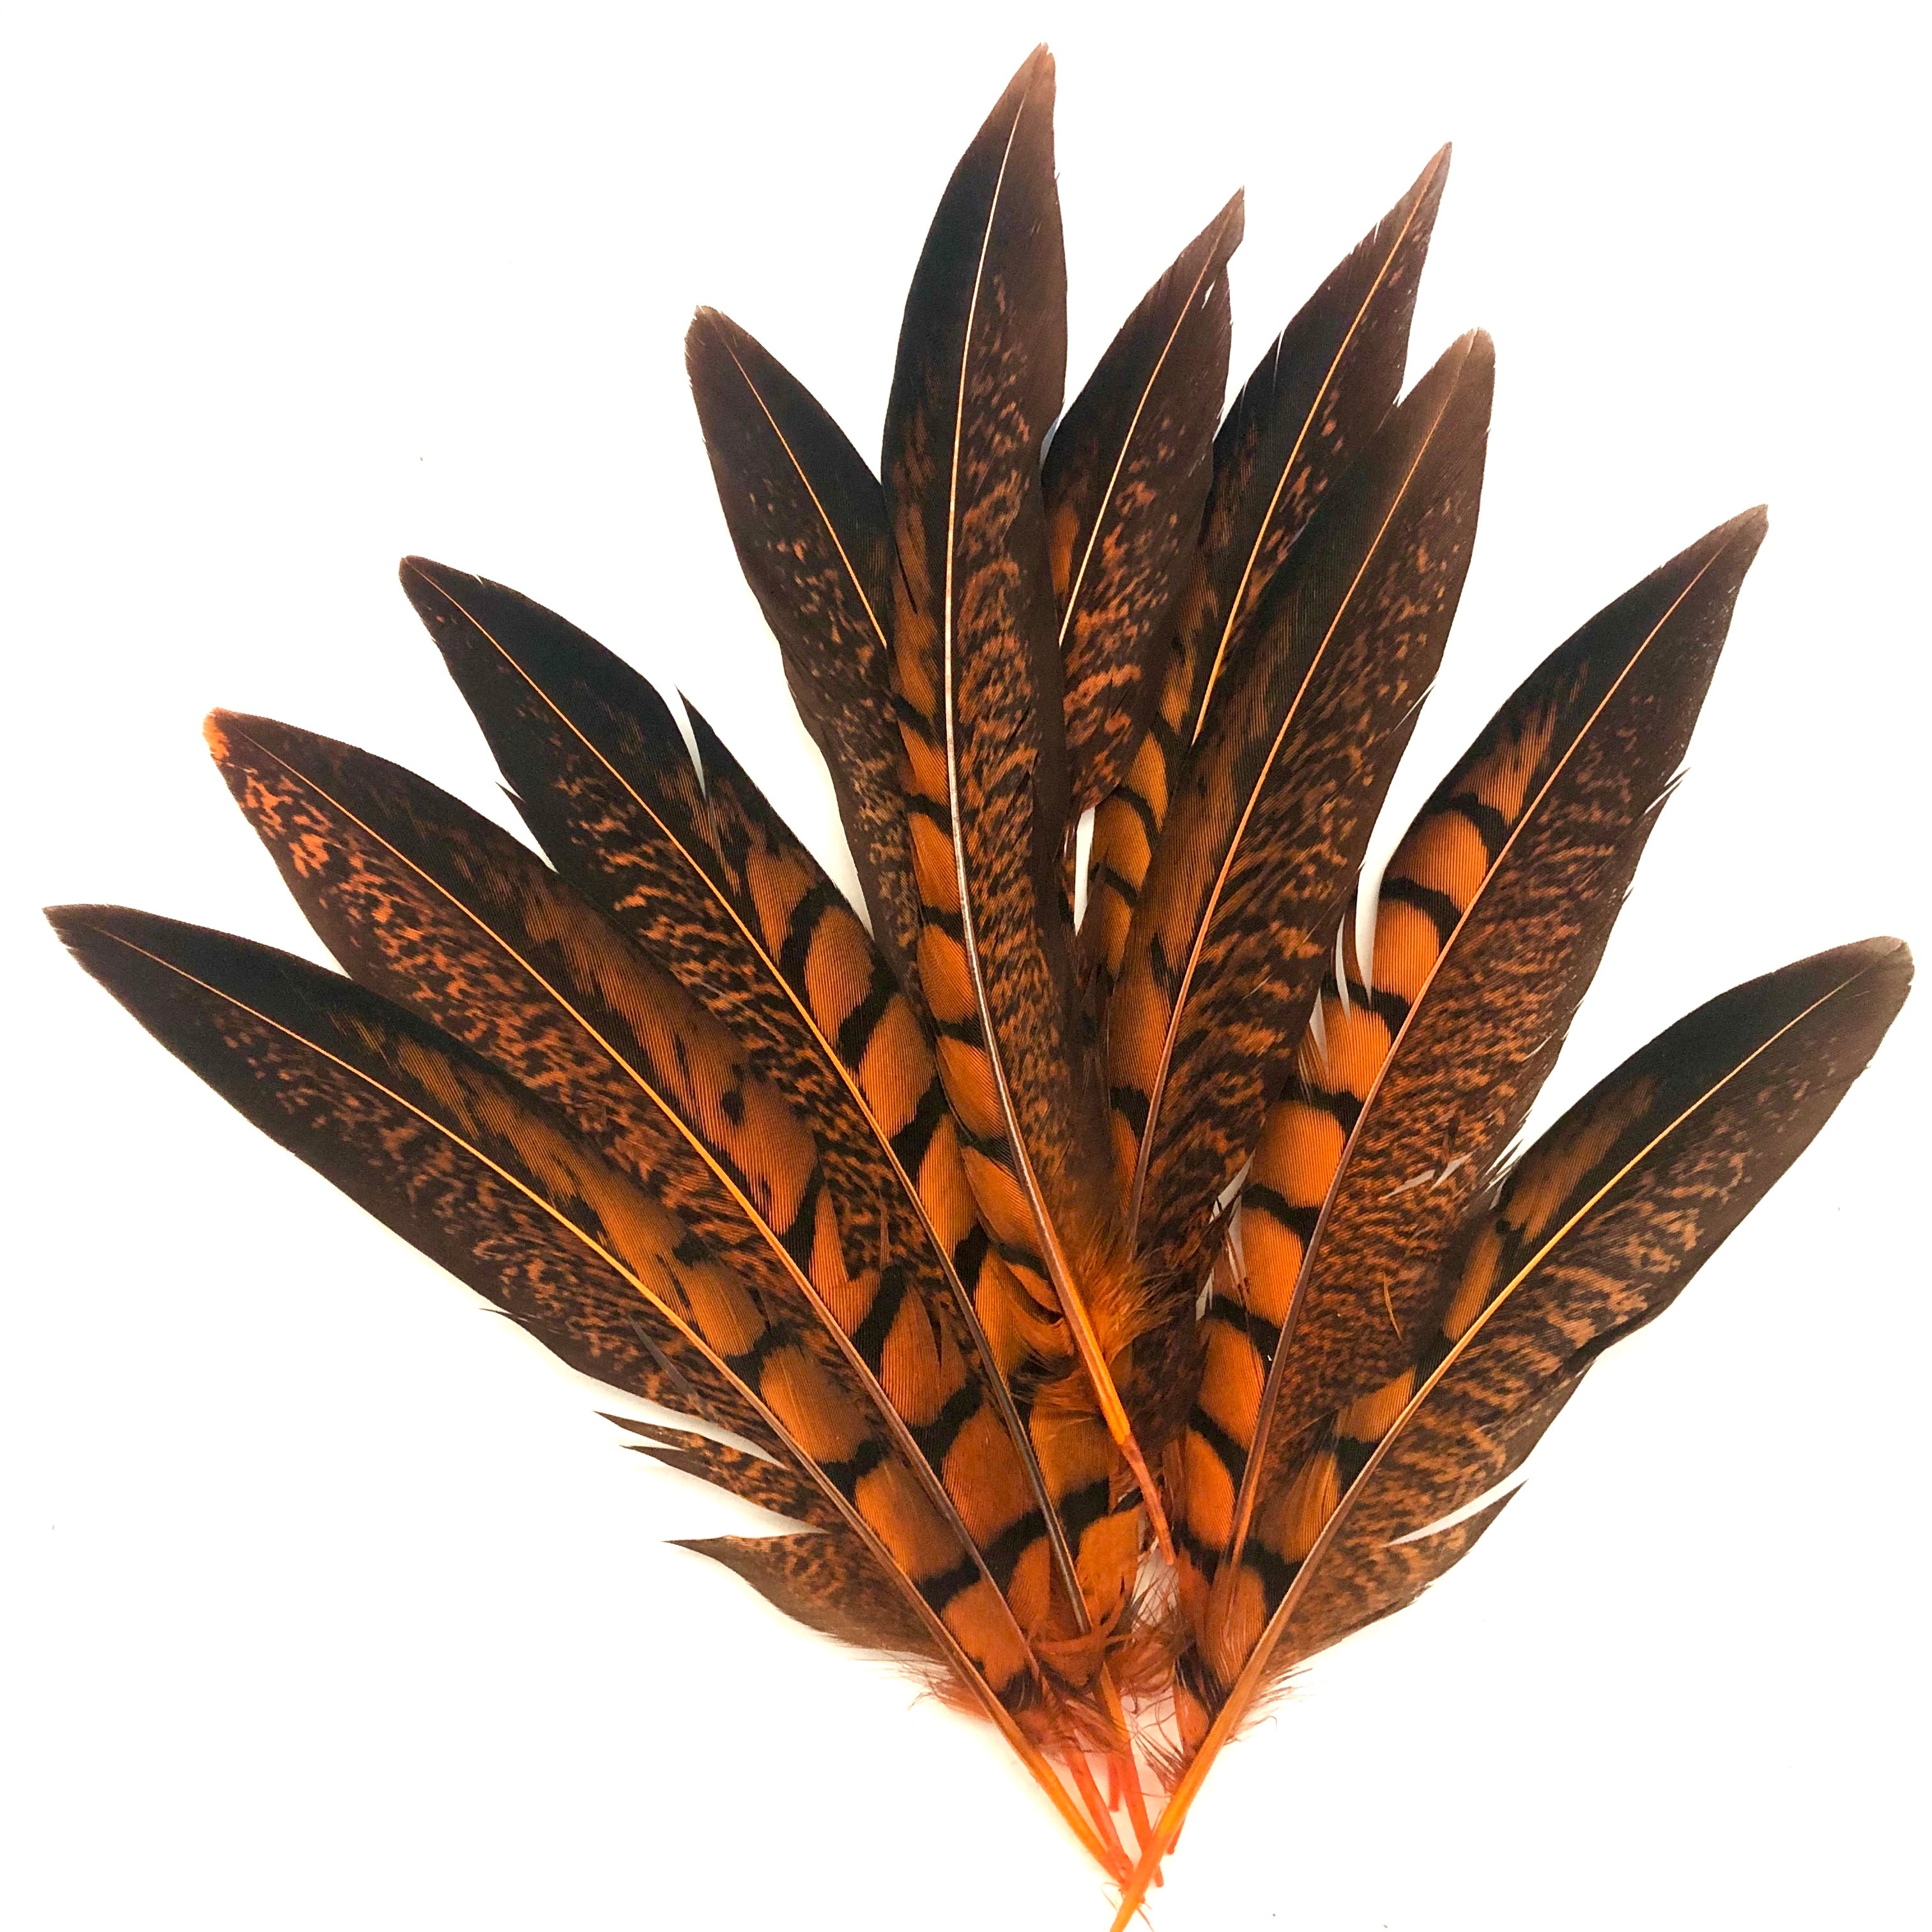 5" to 10" Lady Amherst Pheasant Side Tail Feather x 10 pcs - Orange